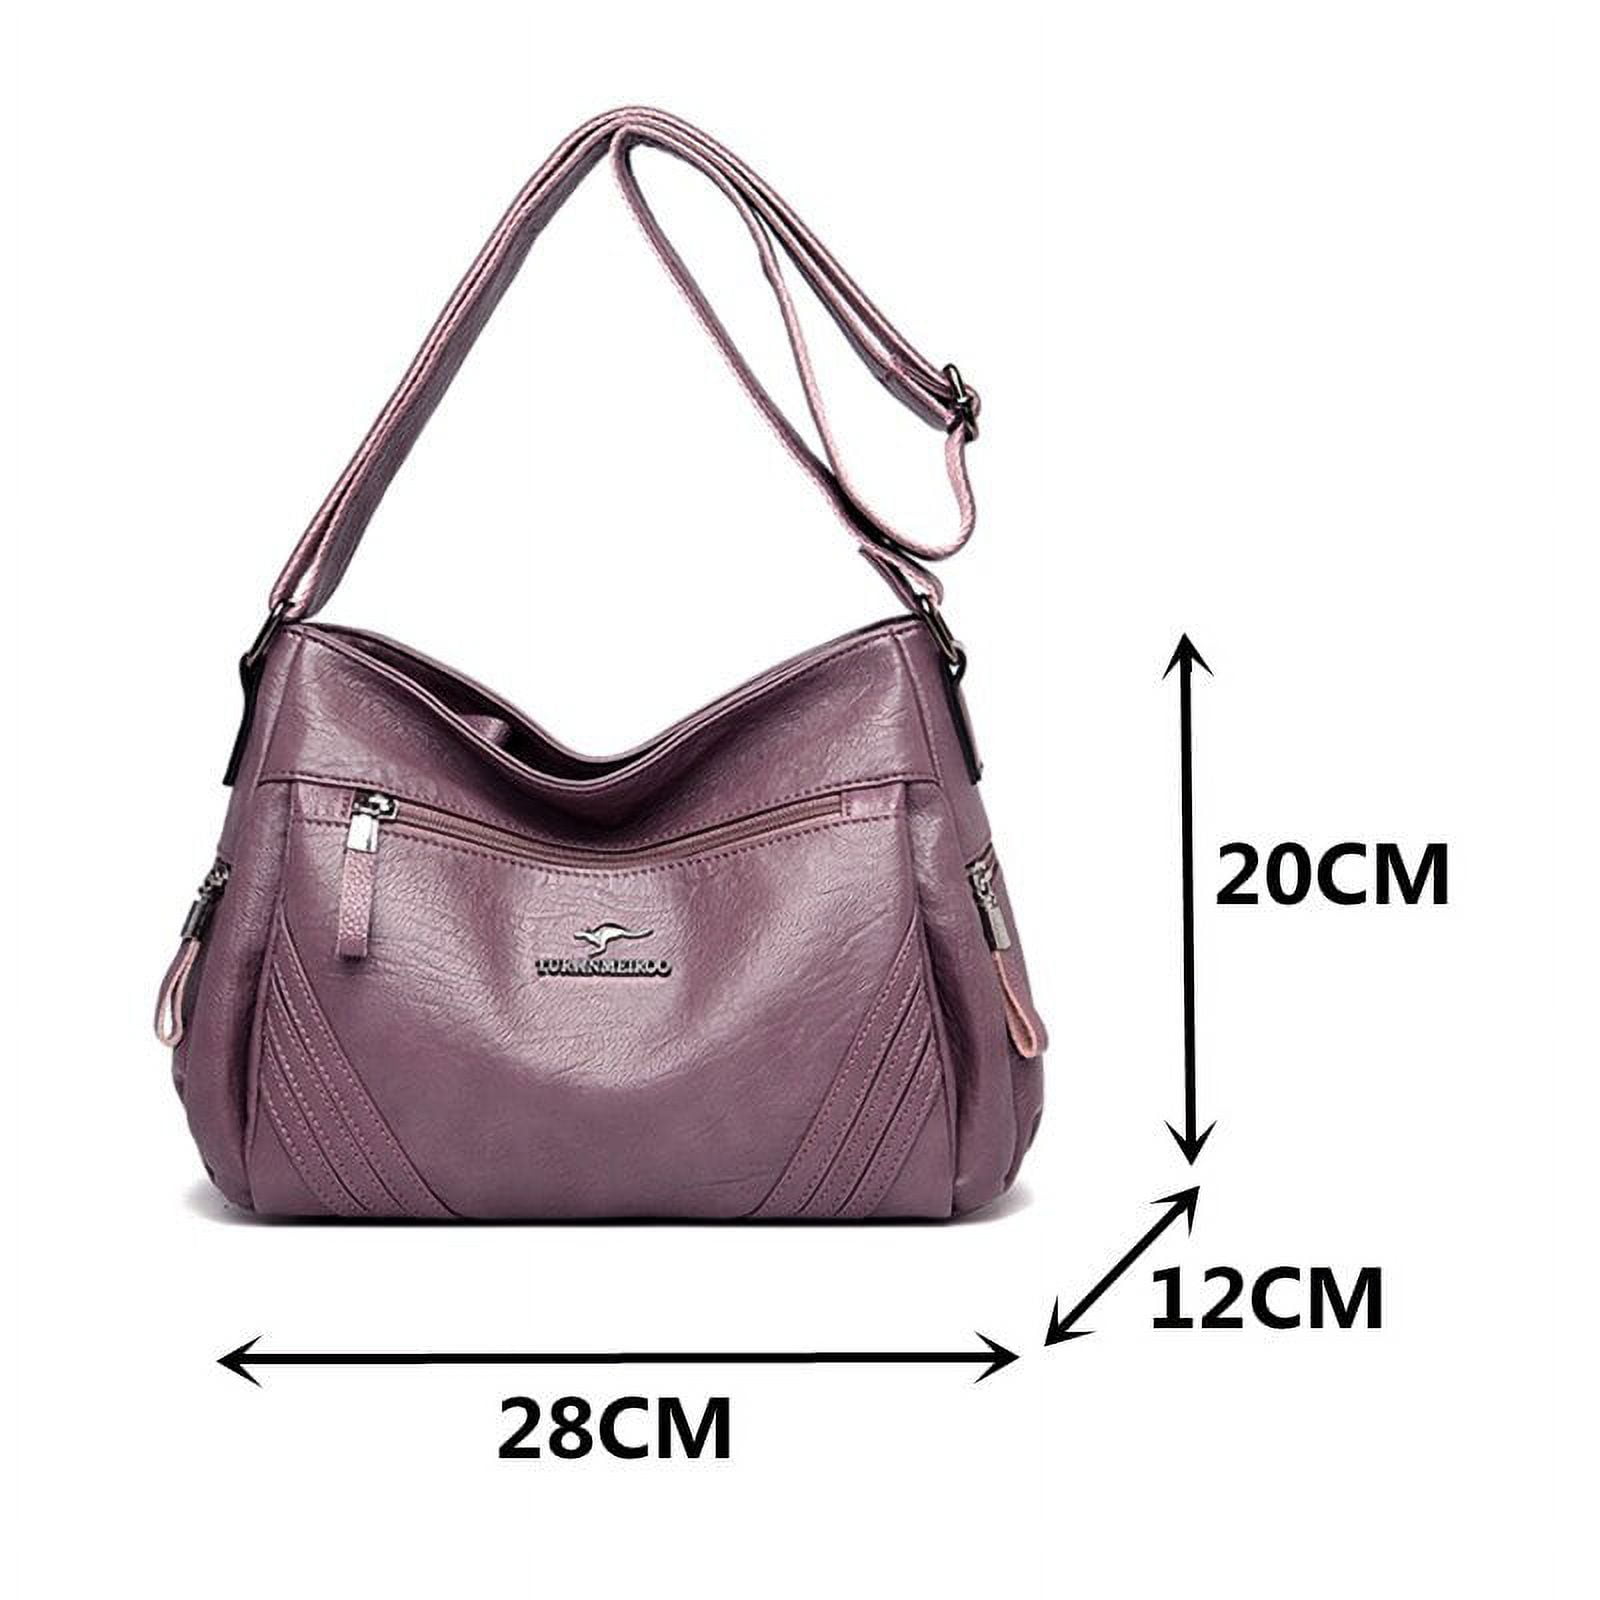 Cocopeaunt Womens Casual Design Shoulder Bags Luxury Soft Leather Crossbody Bag Trend All Match Handbag Lady New Simple Messenger Bag, Adult Unisex